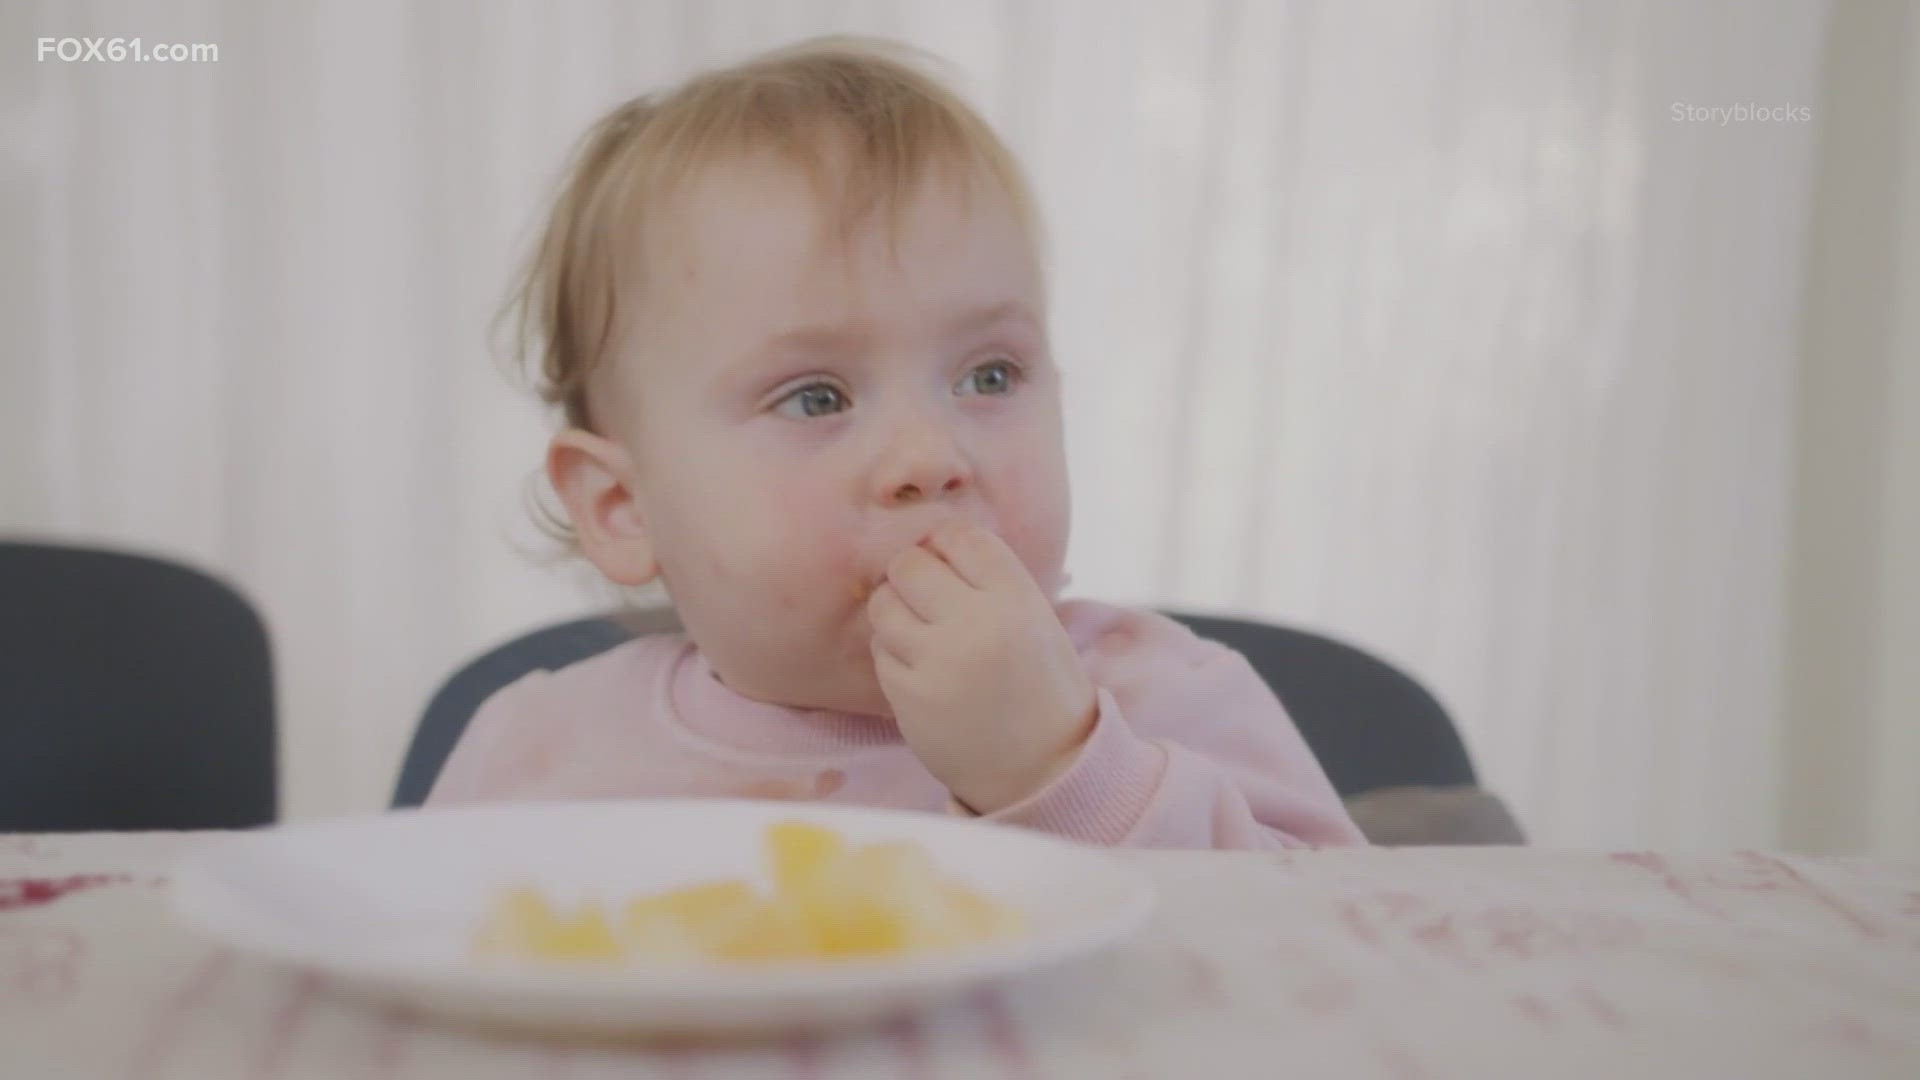 Baby-led weaning goes against traditional spoon feeding, although experts say it’s a return to basics.